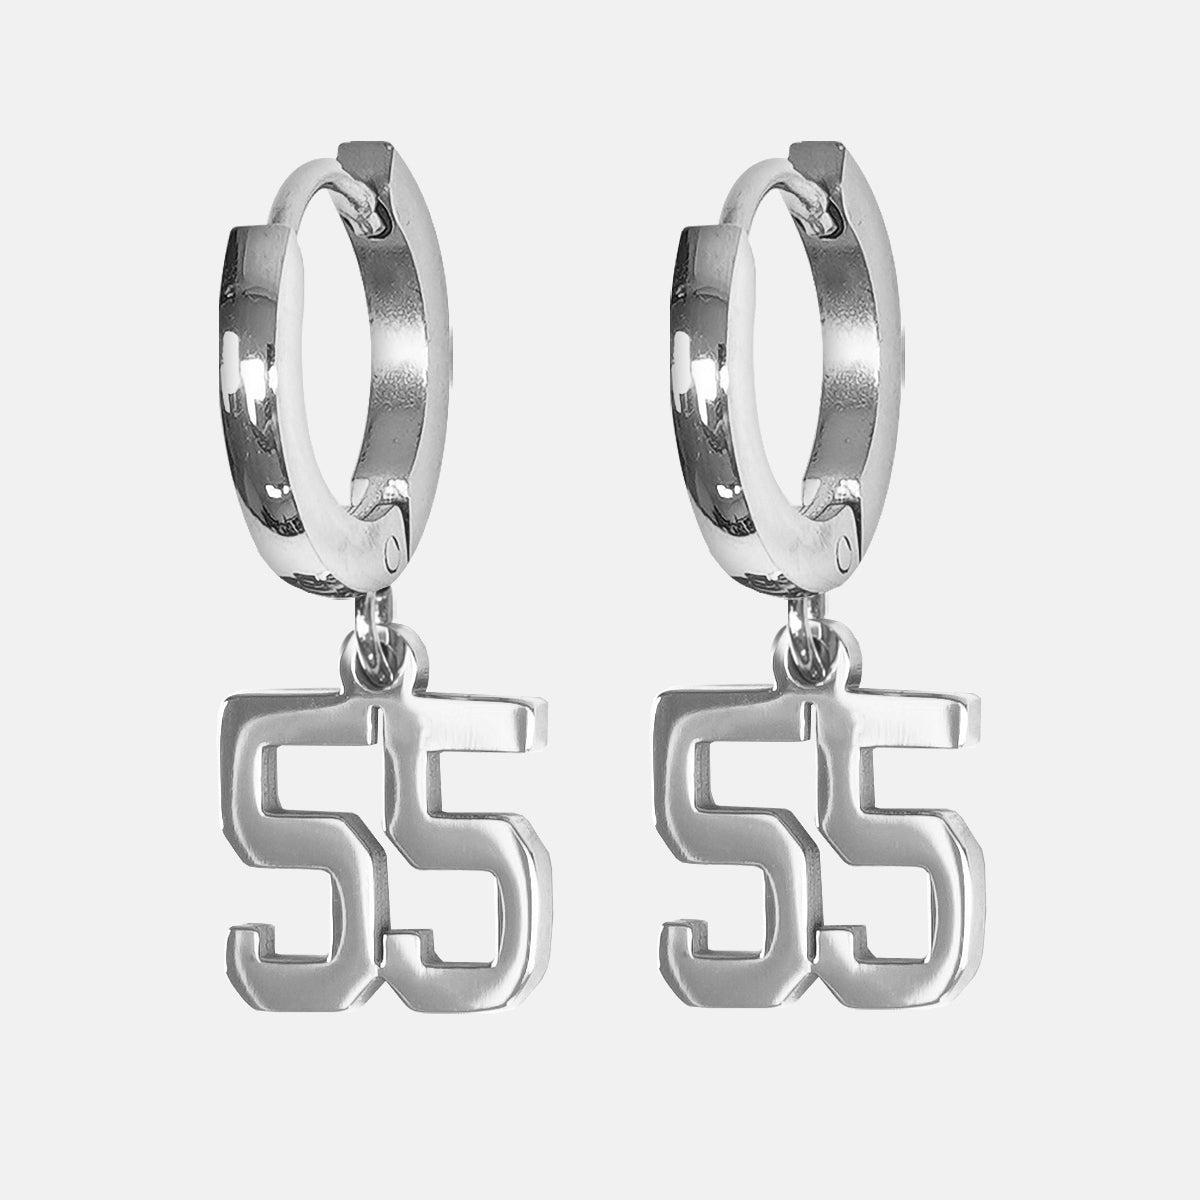 55 Number Earring - Stainless Steel